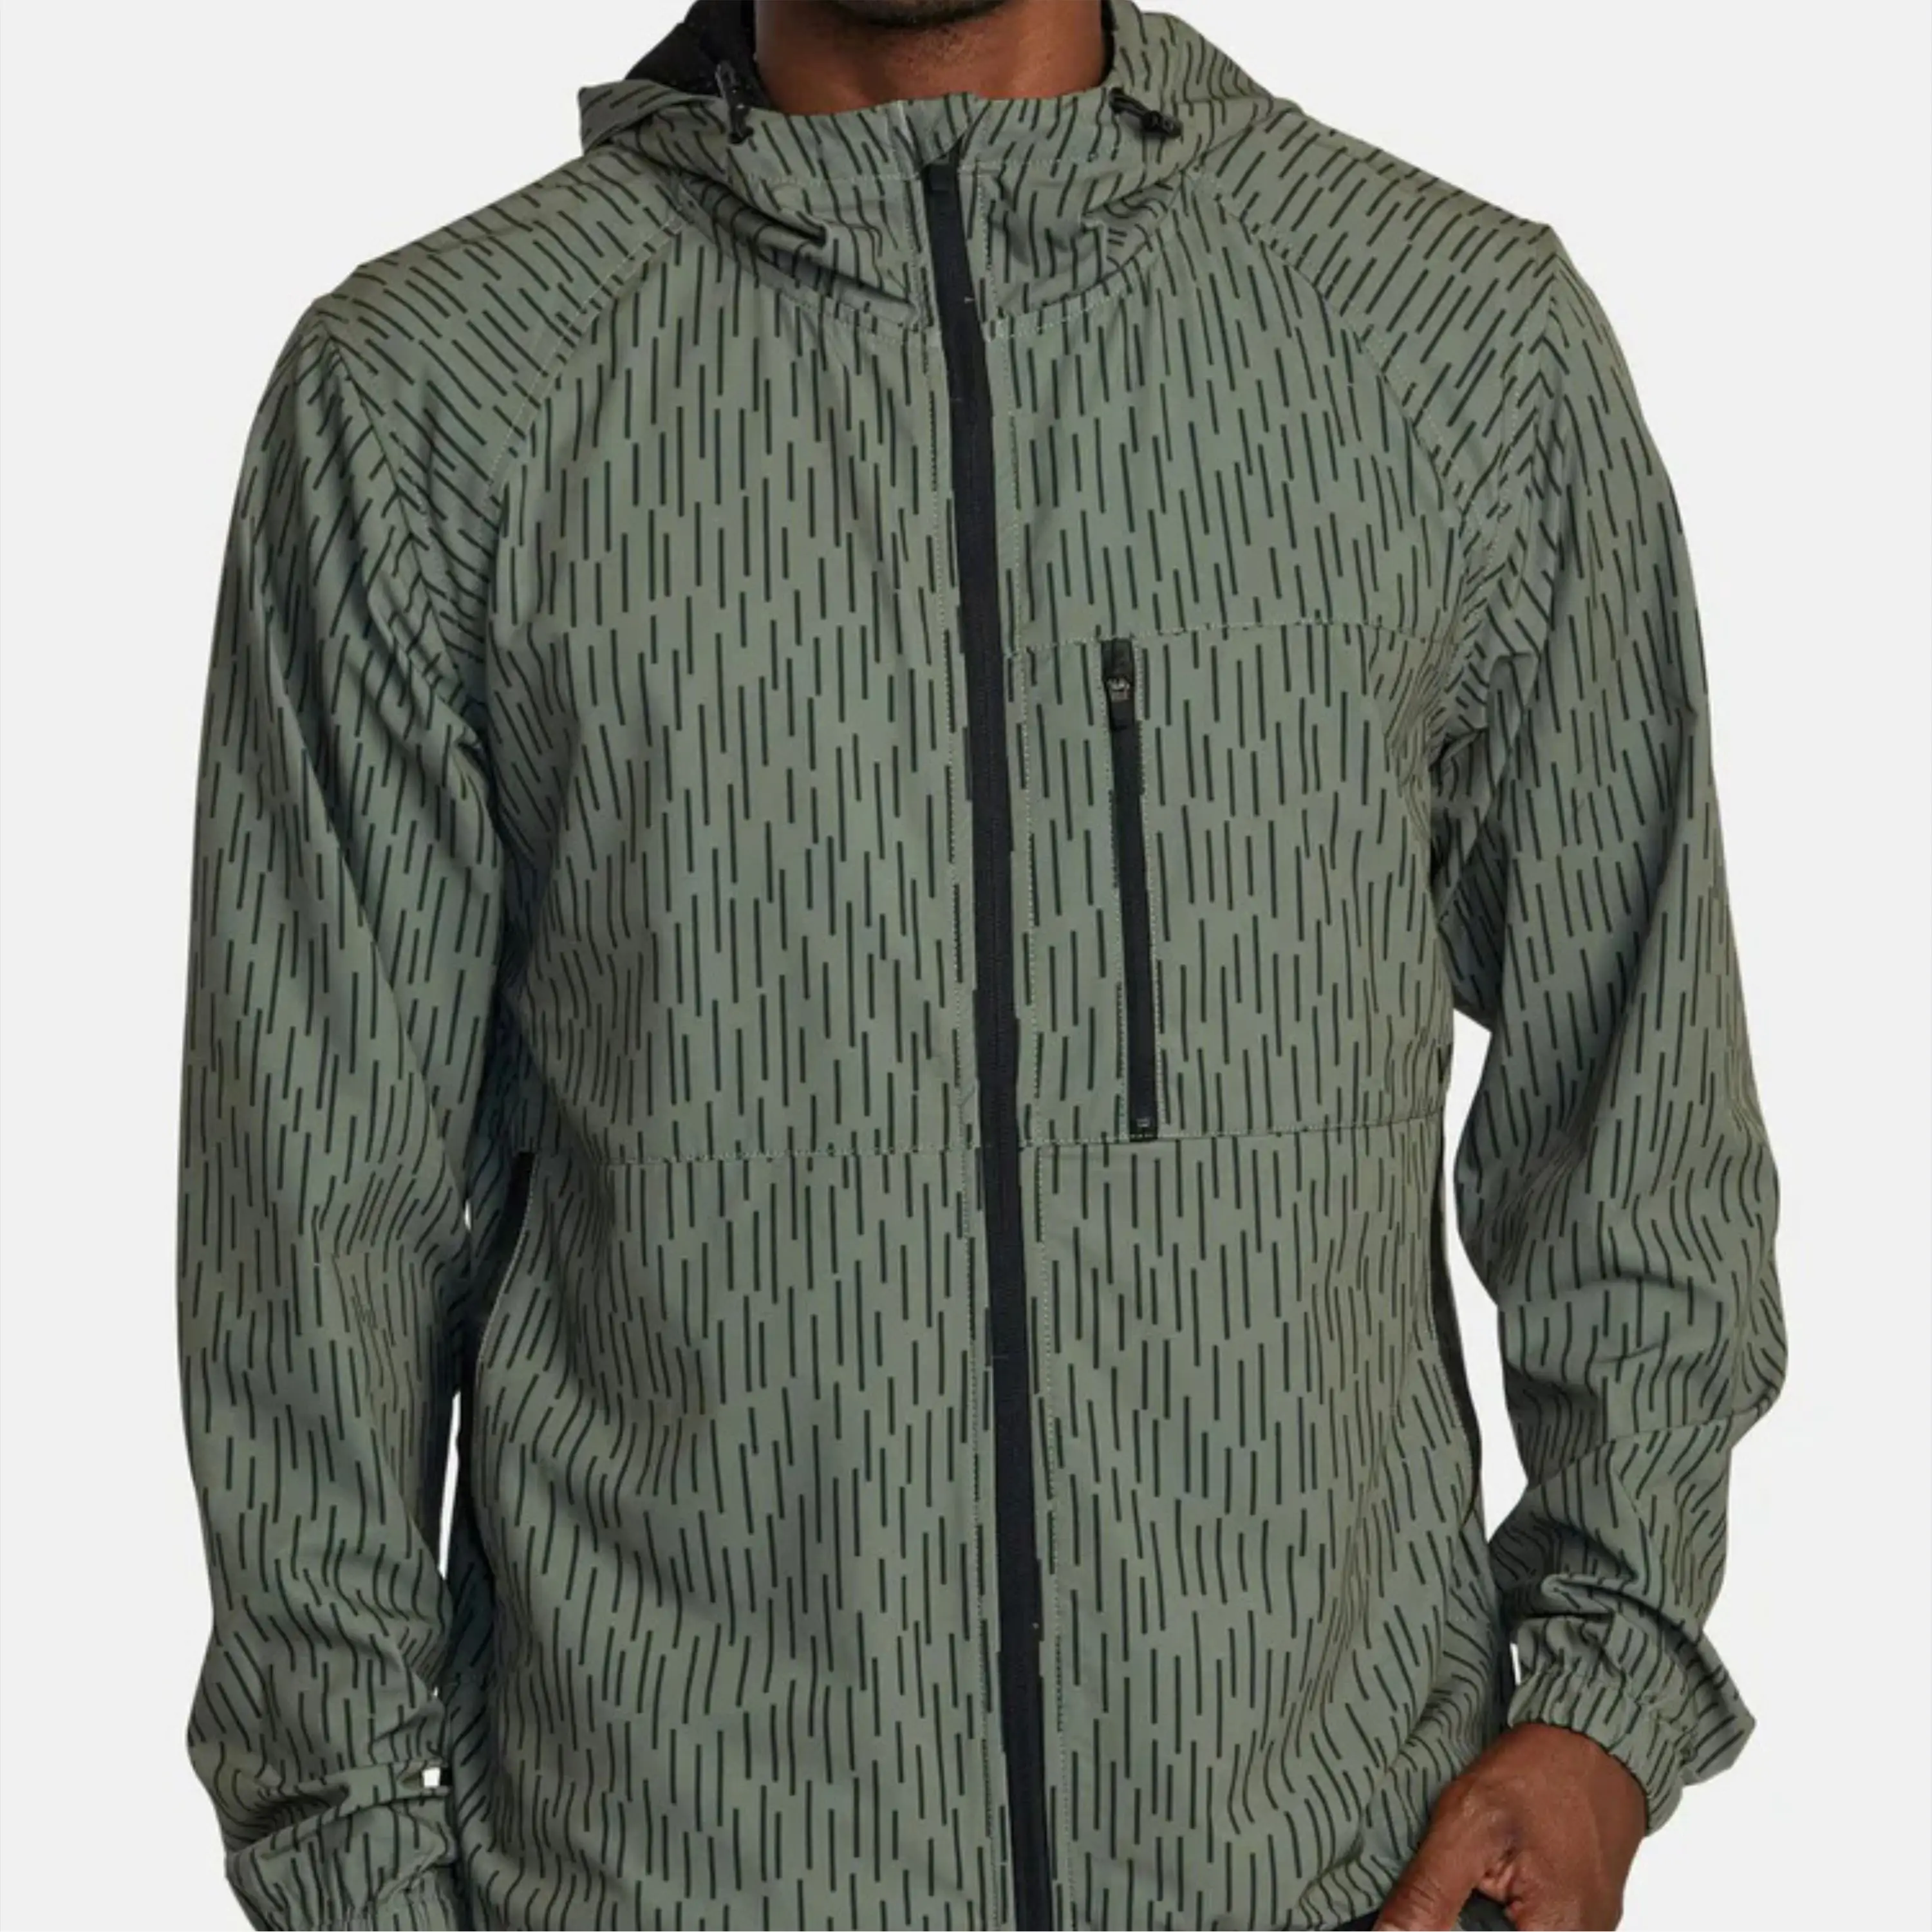 Men's Insulated Hooded Jacket - Warm and Comfortable, Ideal for Winter and Cold Weather Adventures , Great for Casual Wear